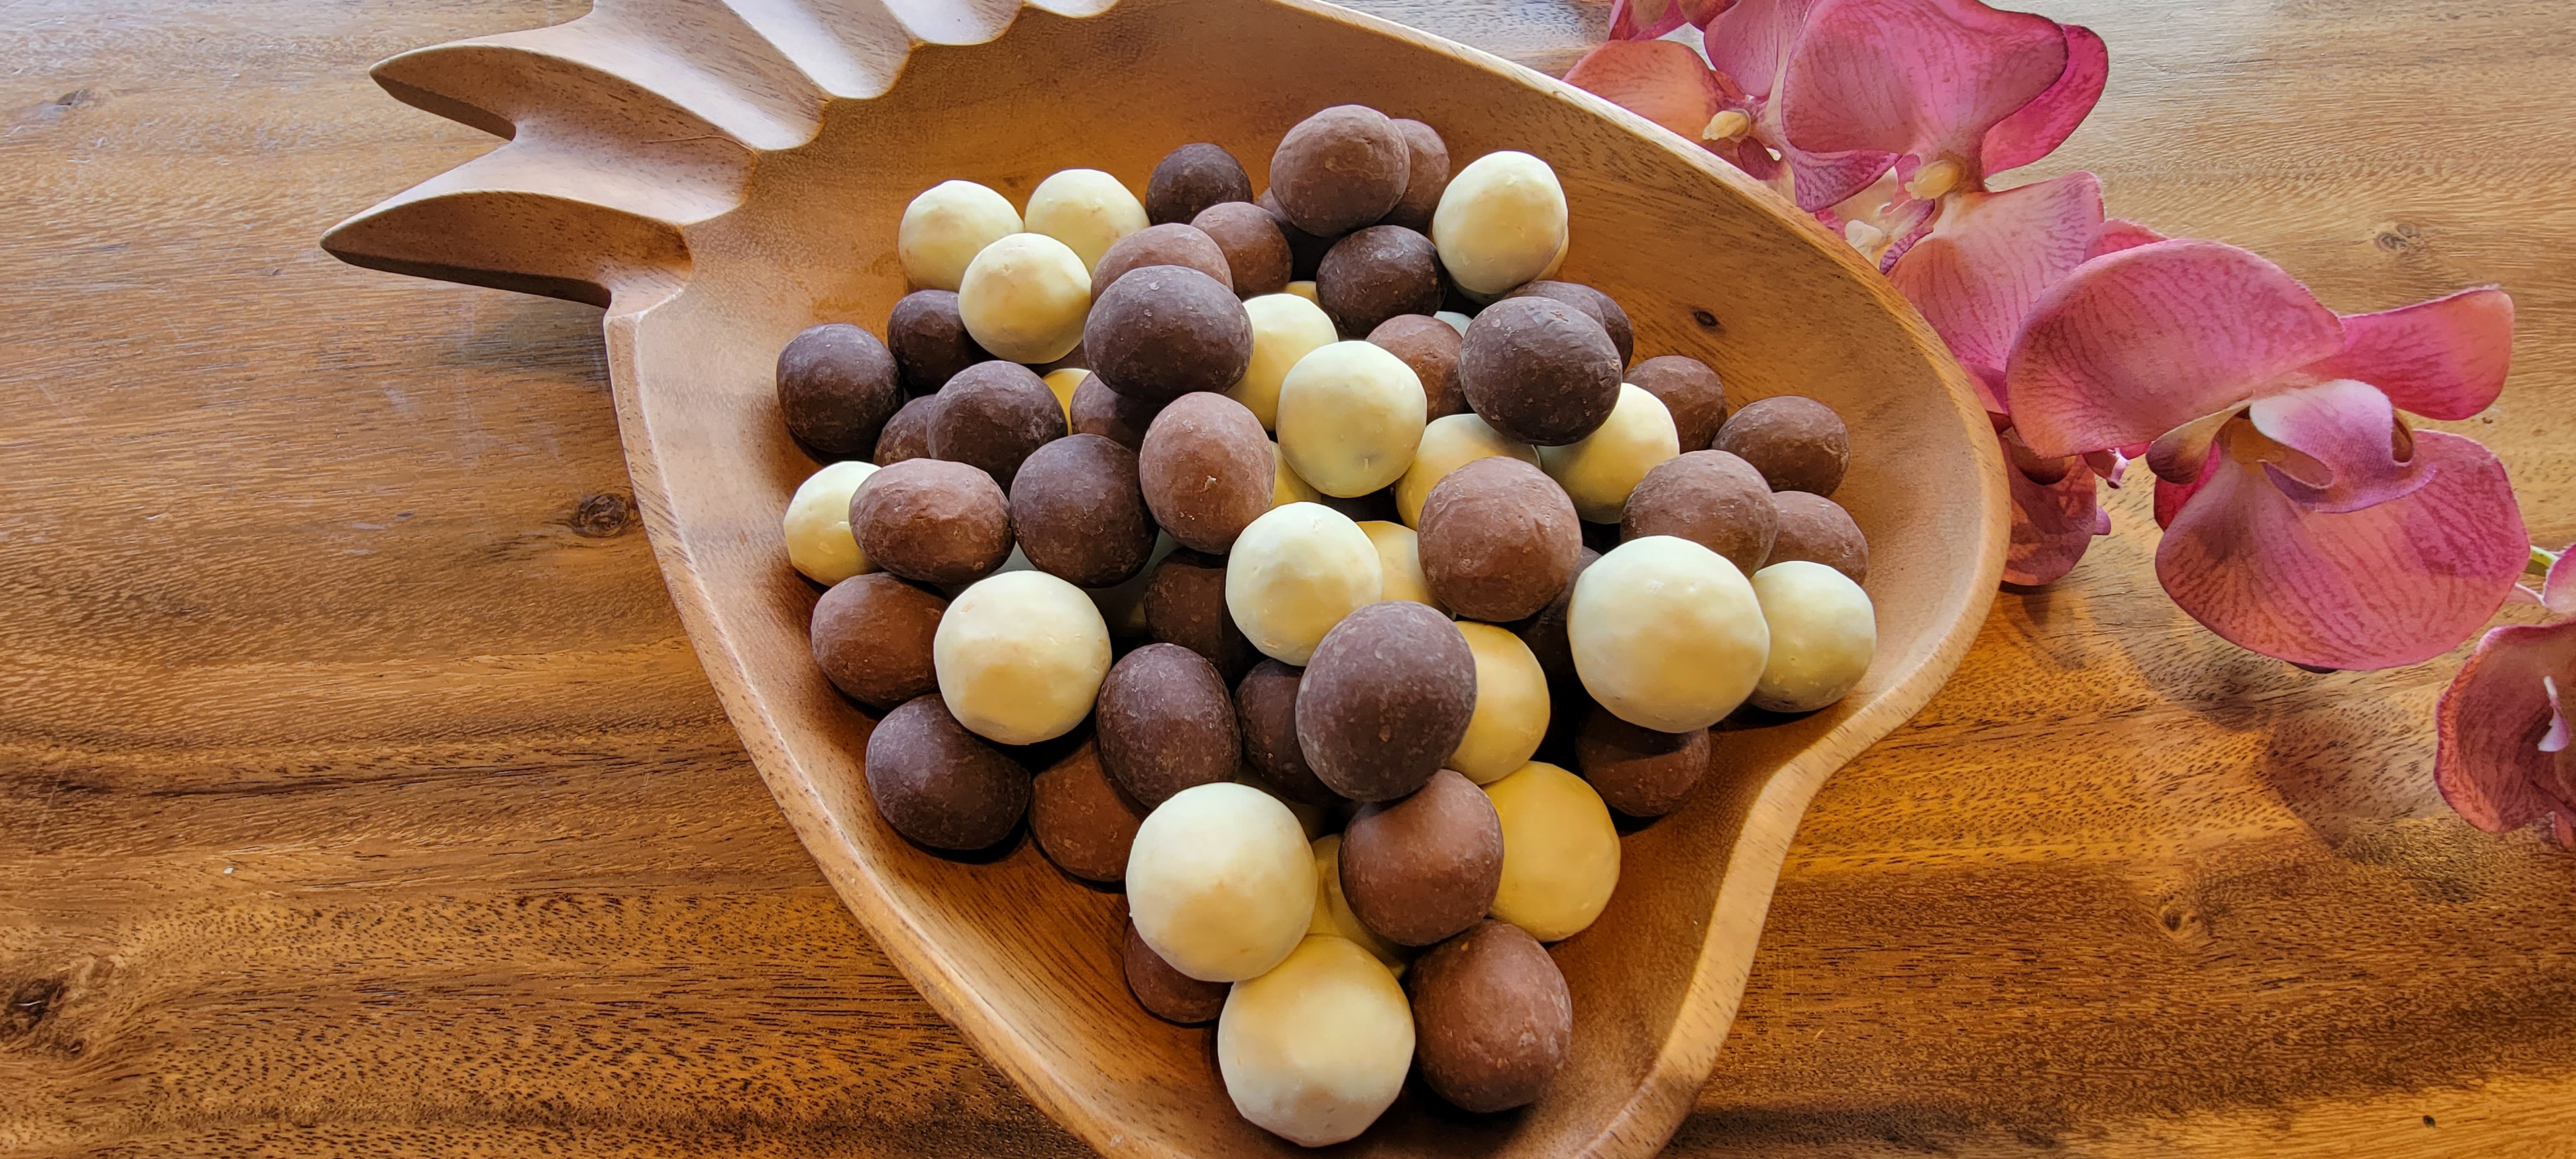 Macadamia Nuts - Ultimate Mix of Chocolate Covered